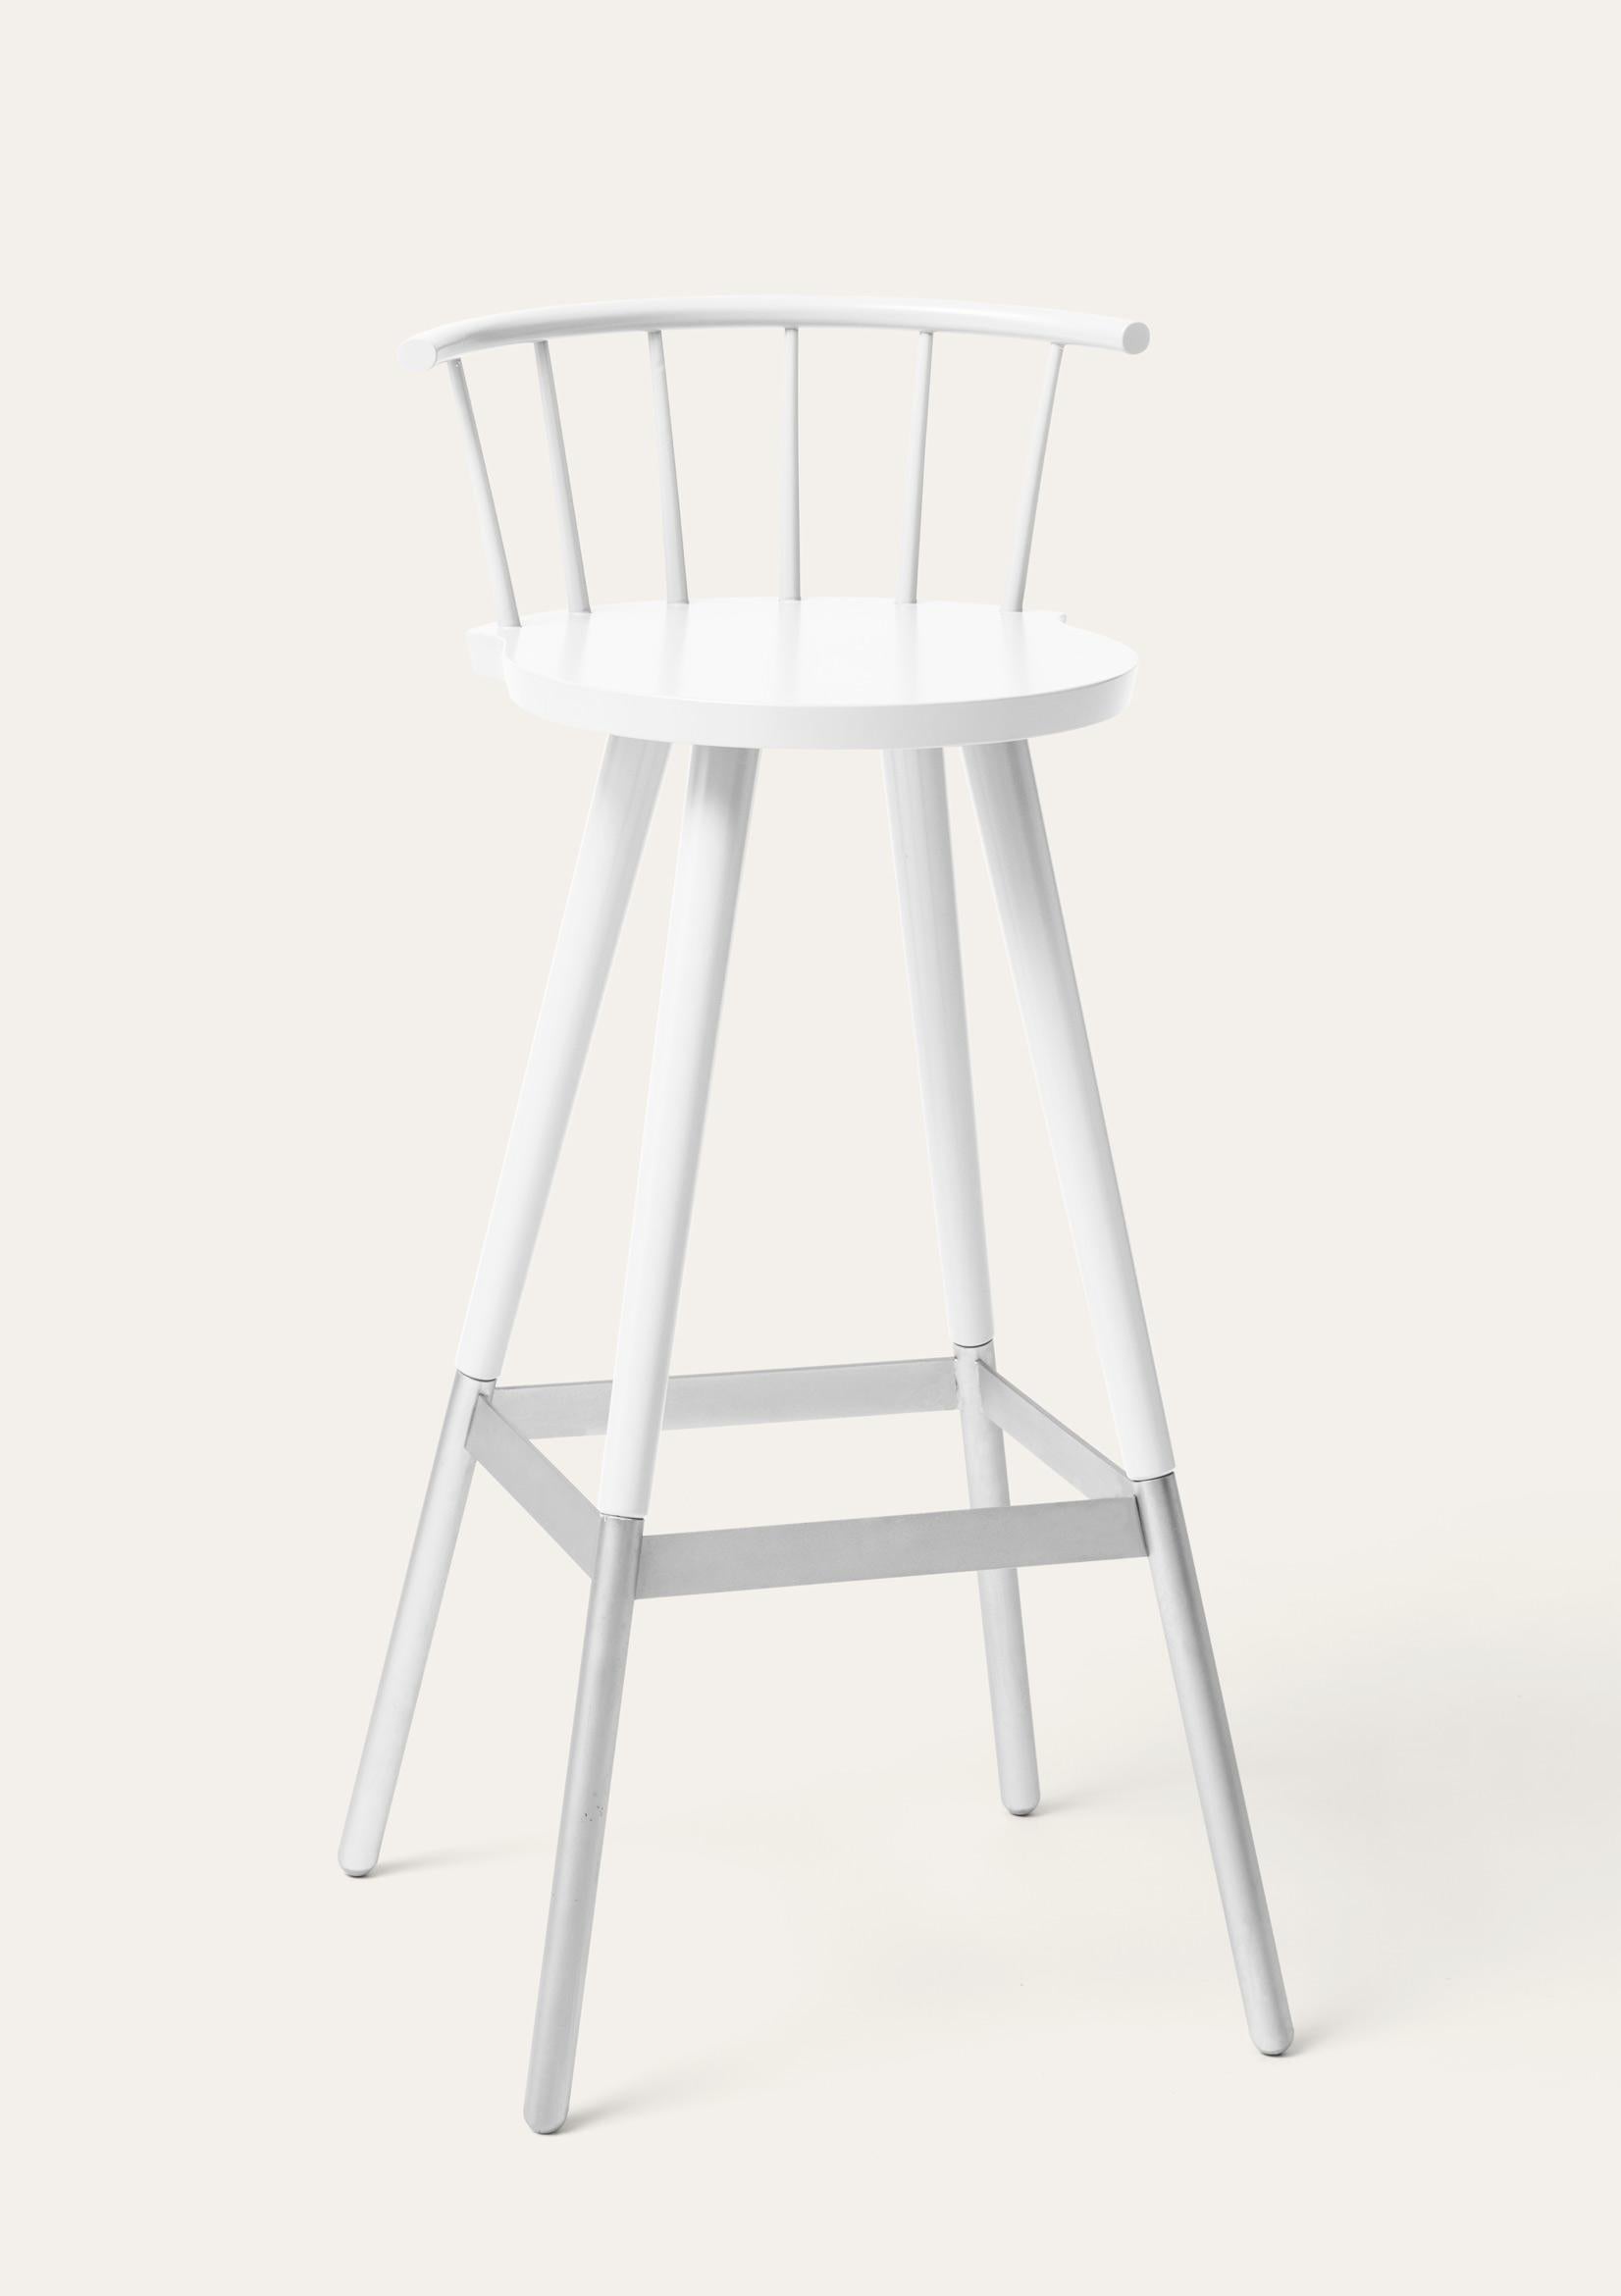 Large White Tupp barstool by Storängen Design
Dimensions: D 45 x W 45 x H 102 x SH 82 cm
Materials: birch wood, nickel plated steel.
Also available in other colors.

Give the bar some character! Tupp is avaliable in two heights, both with and